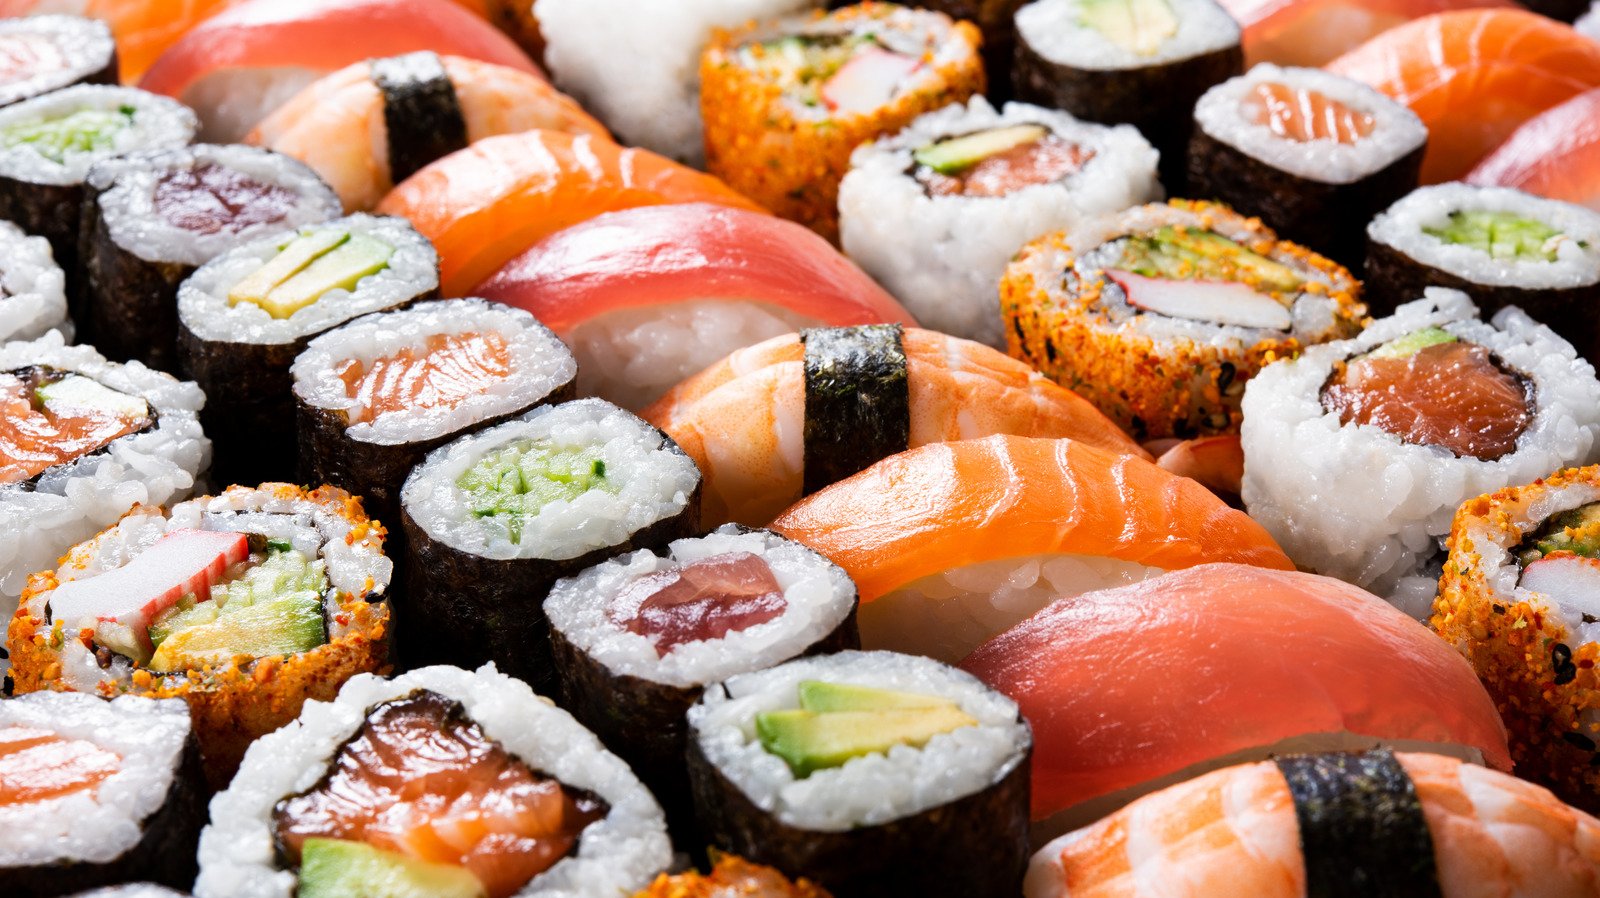 Tuna Vs Salmon: Which One Is Better For You? - Health Digest